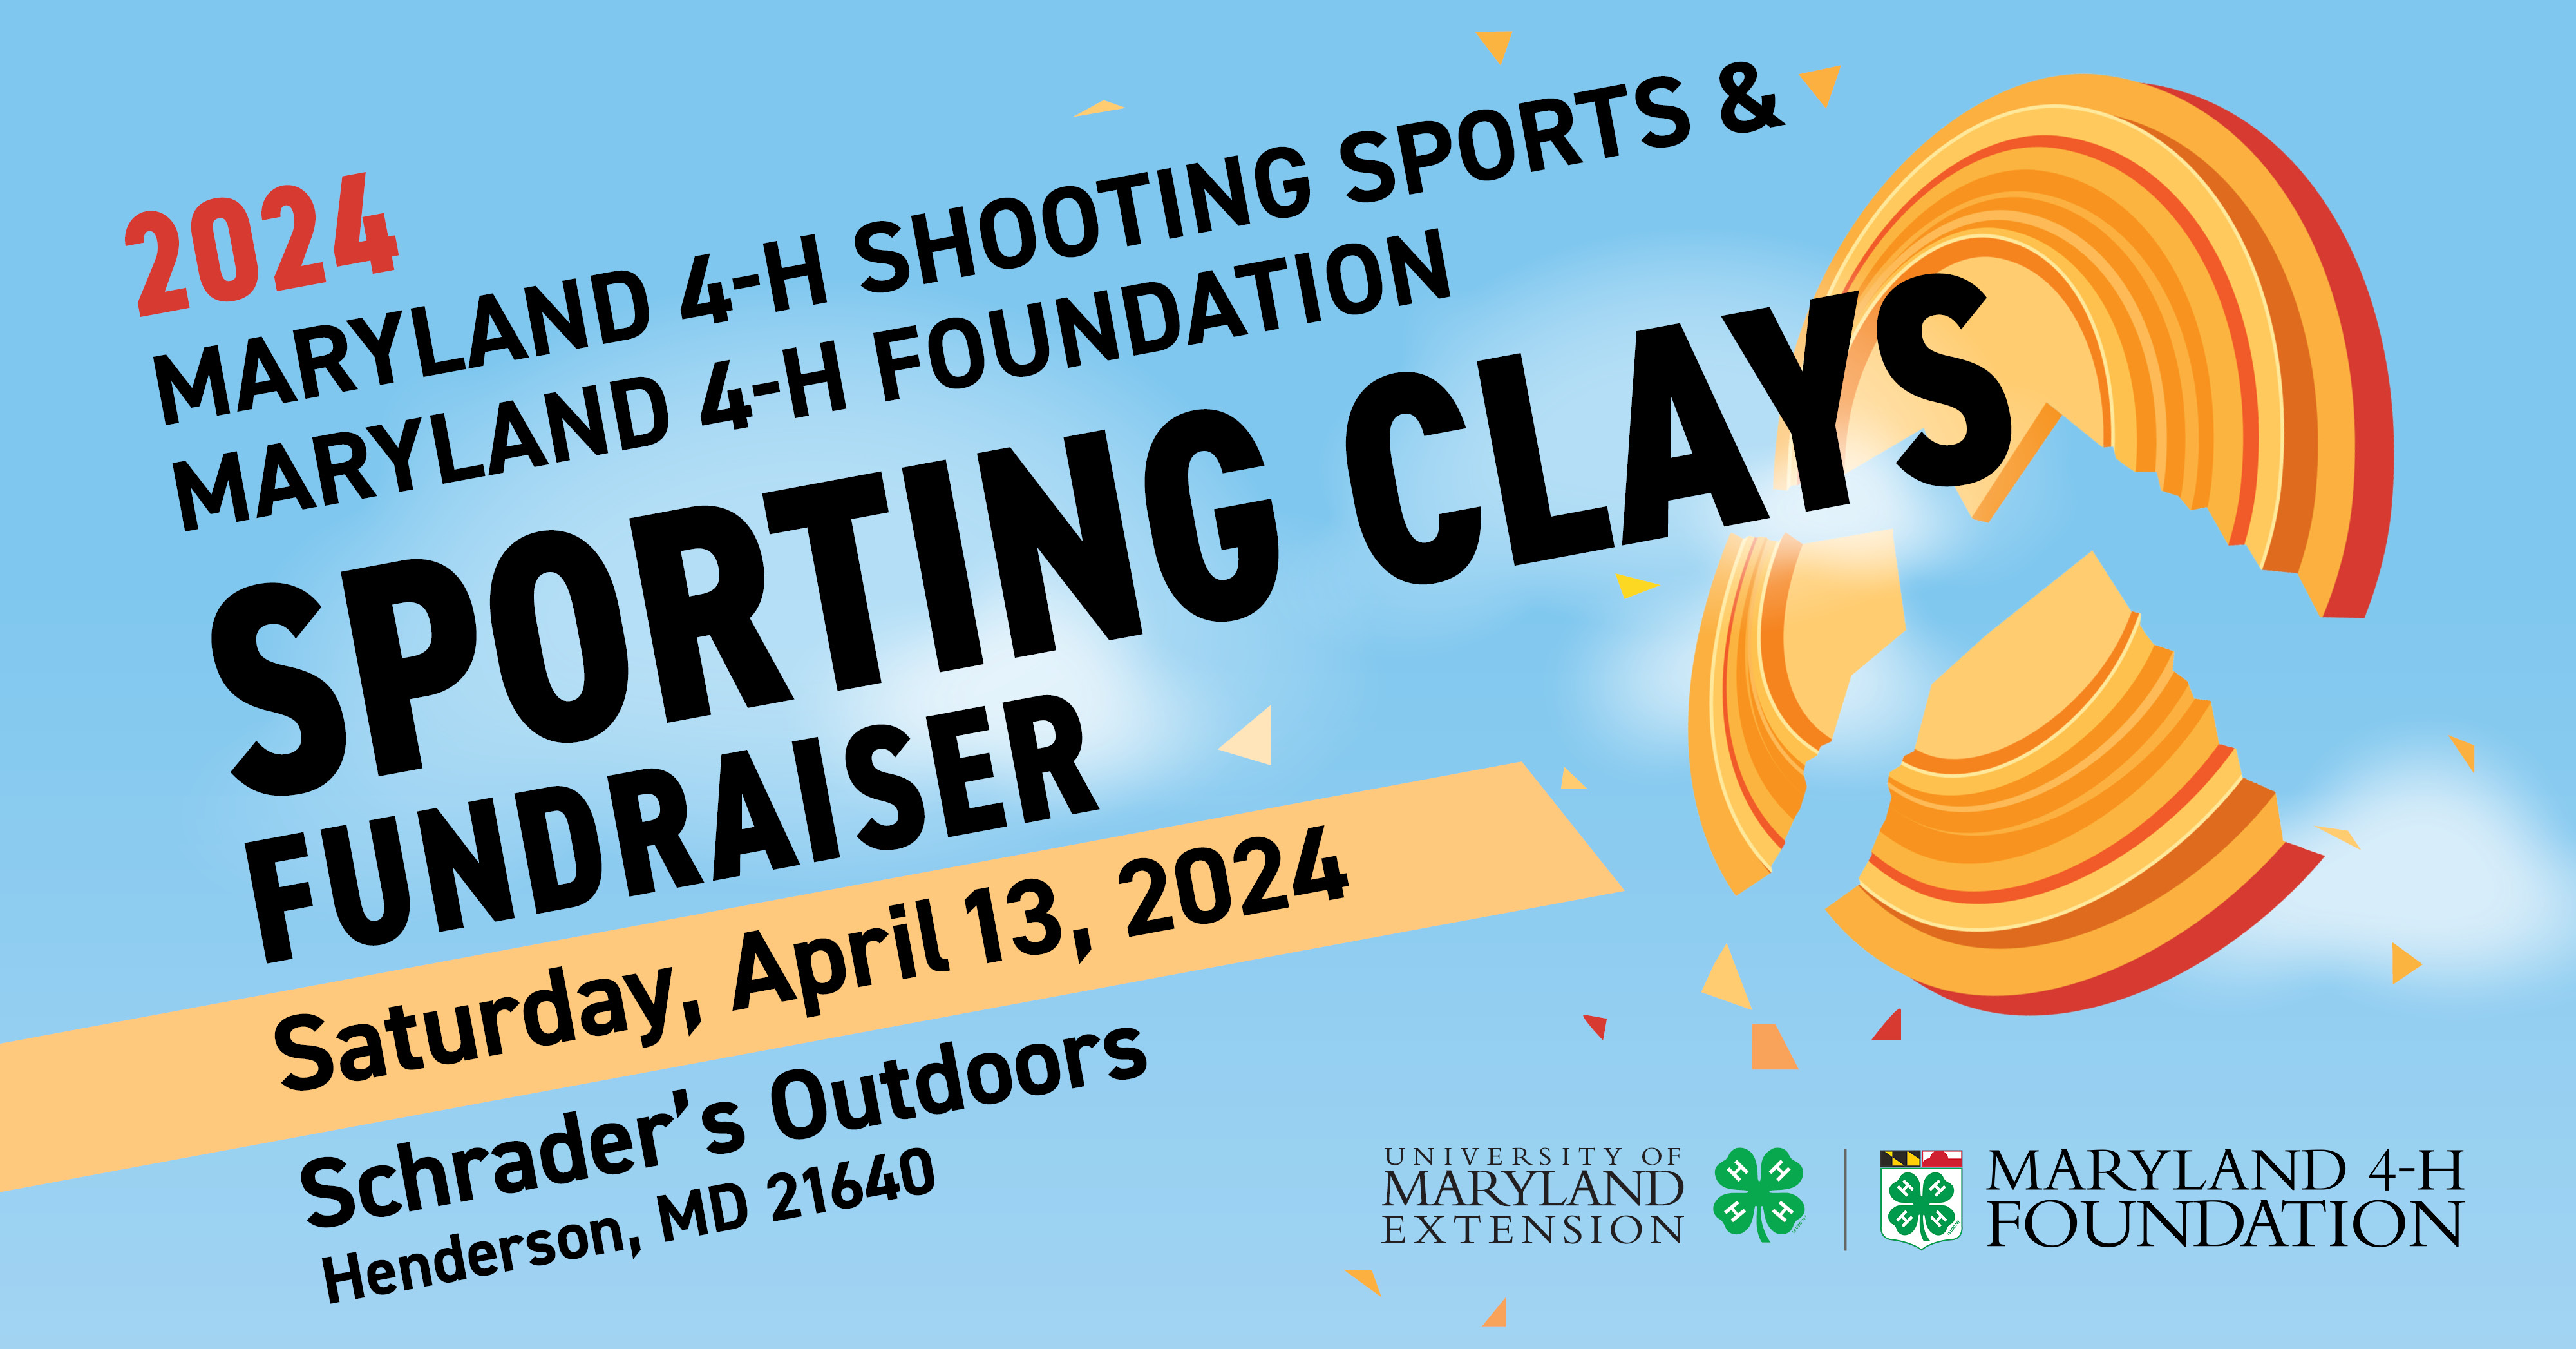 2024 Shooting Clays Fundraiser April 13, 2024 with a clay that has been hit and shattered.